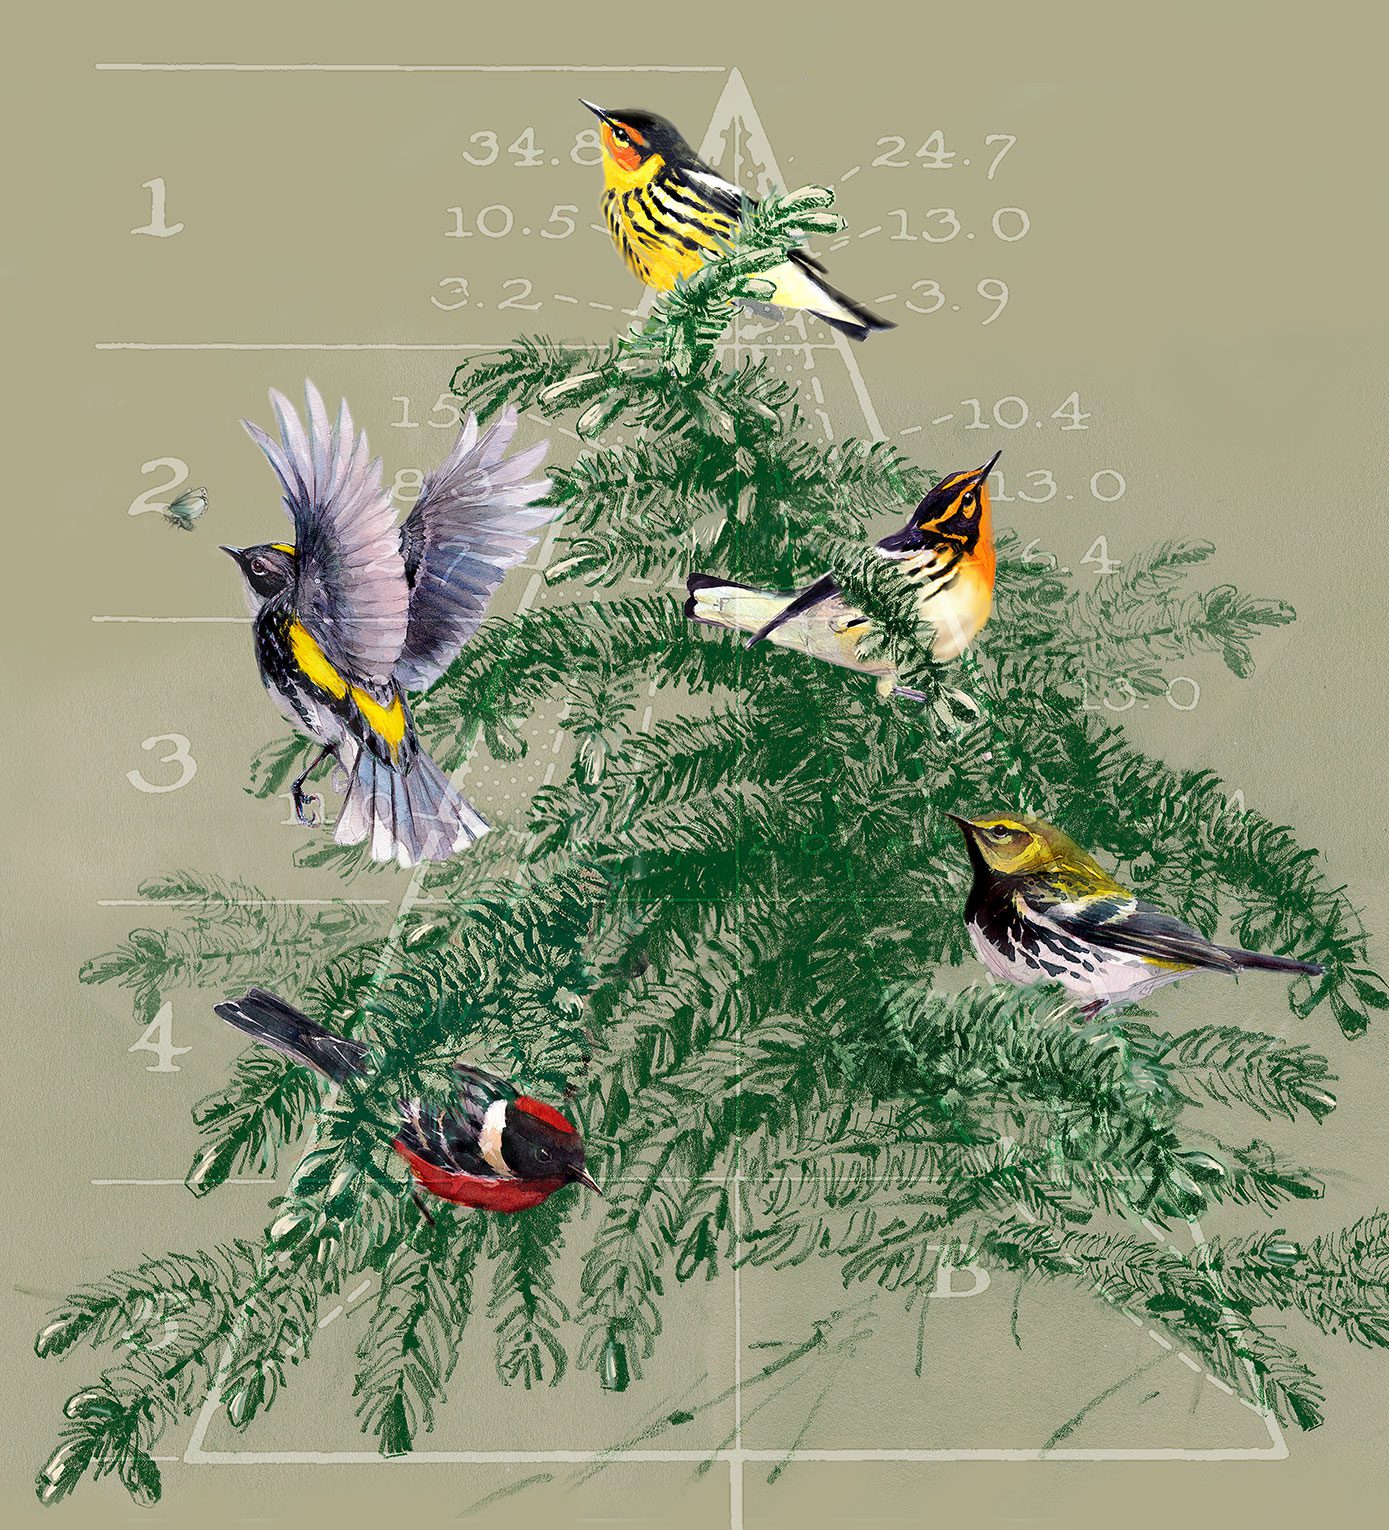 In his research published in 1958, Robert MacArthur famously included sketches that noted the foraging differences among warblers in the spruce trees. For each warbler species, he denoted areas of the tree where that warbler species spent most of its feeding time (clockwise from top: Cape May, Blackburnian, Black-throated Green, Bay-breasted, and Yellow-rumped warbler). Illustration by Deborah Kaspari.